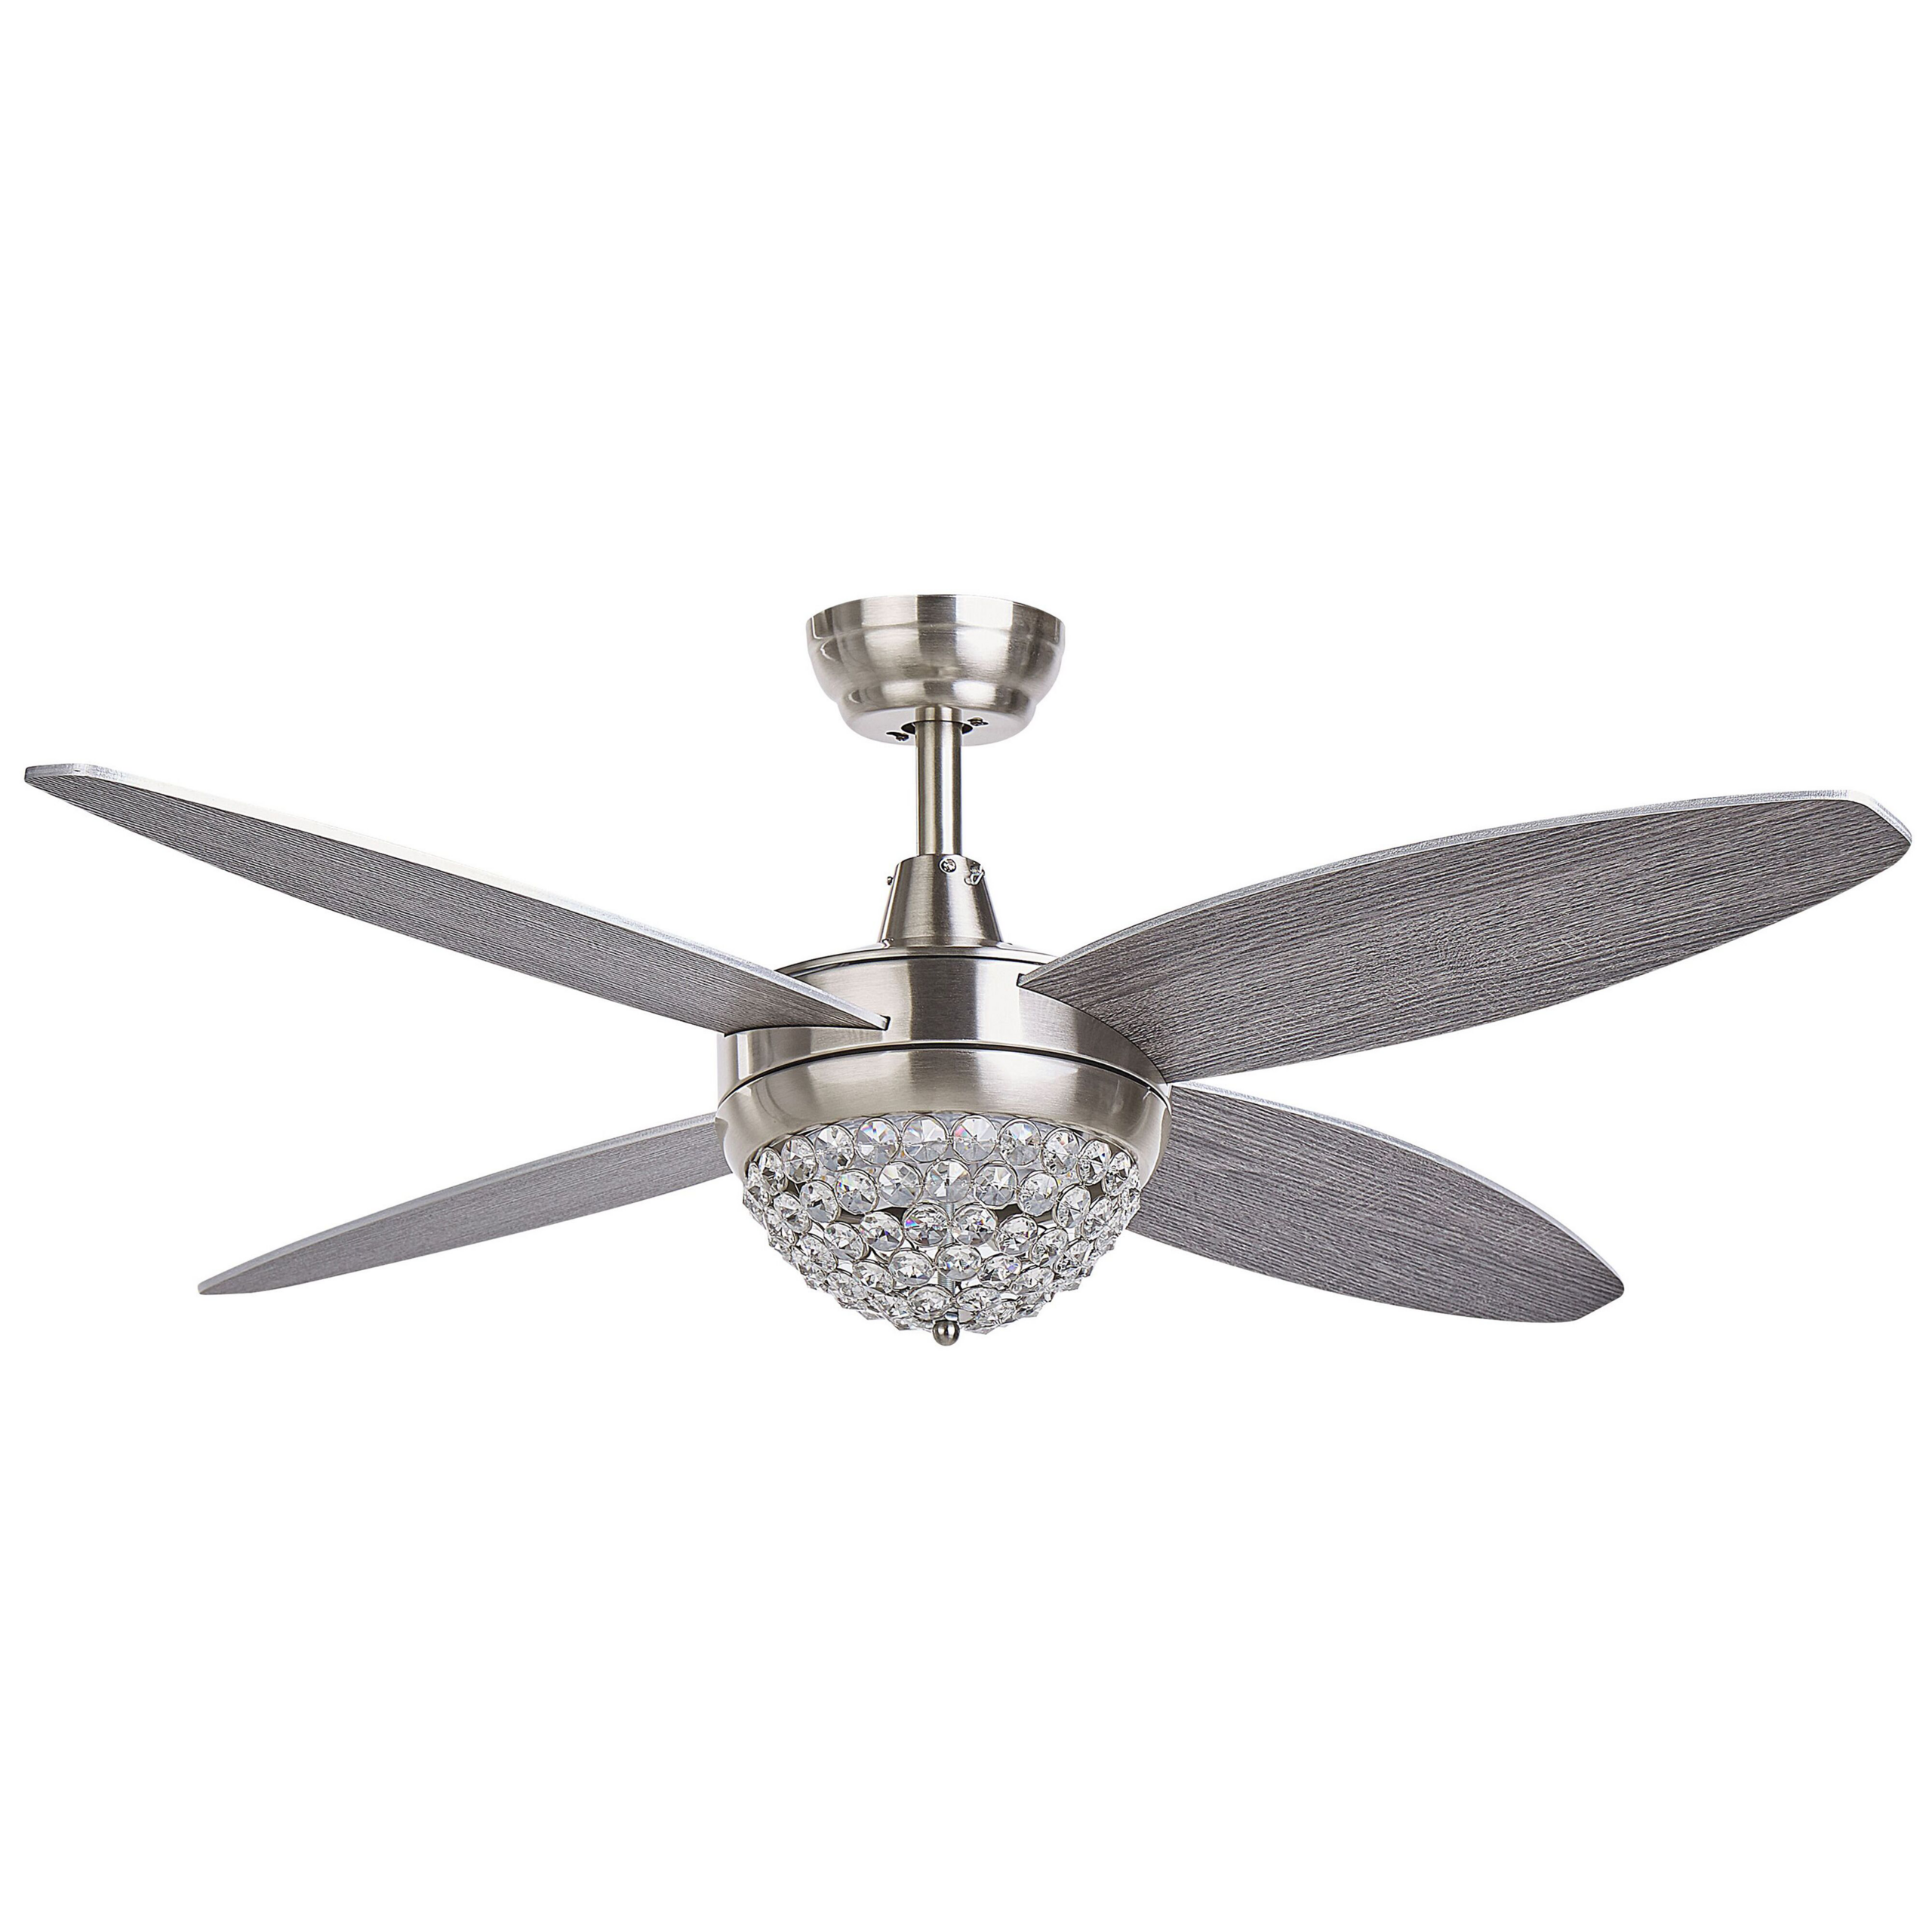 Beliani Ceiling Fan with Light Silver Metal Grey Reversible Blades Glam Crystal Shade with Remote Control 3 Speeds Switch Timer Light Adjustment